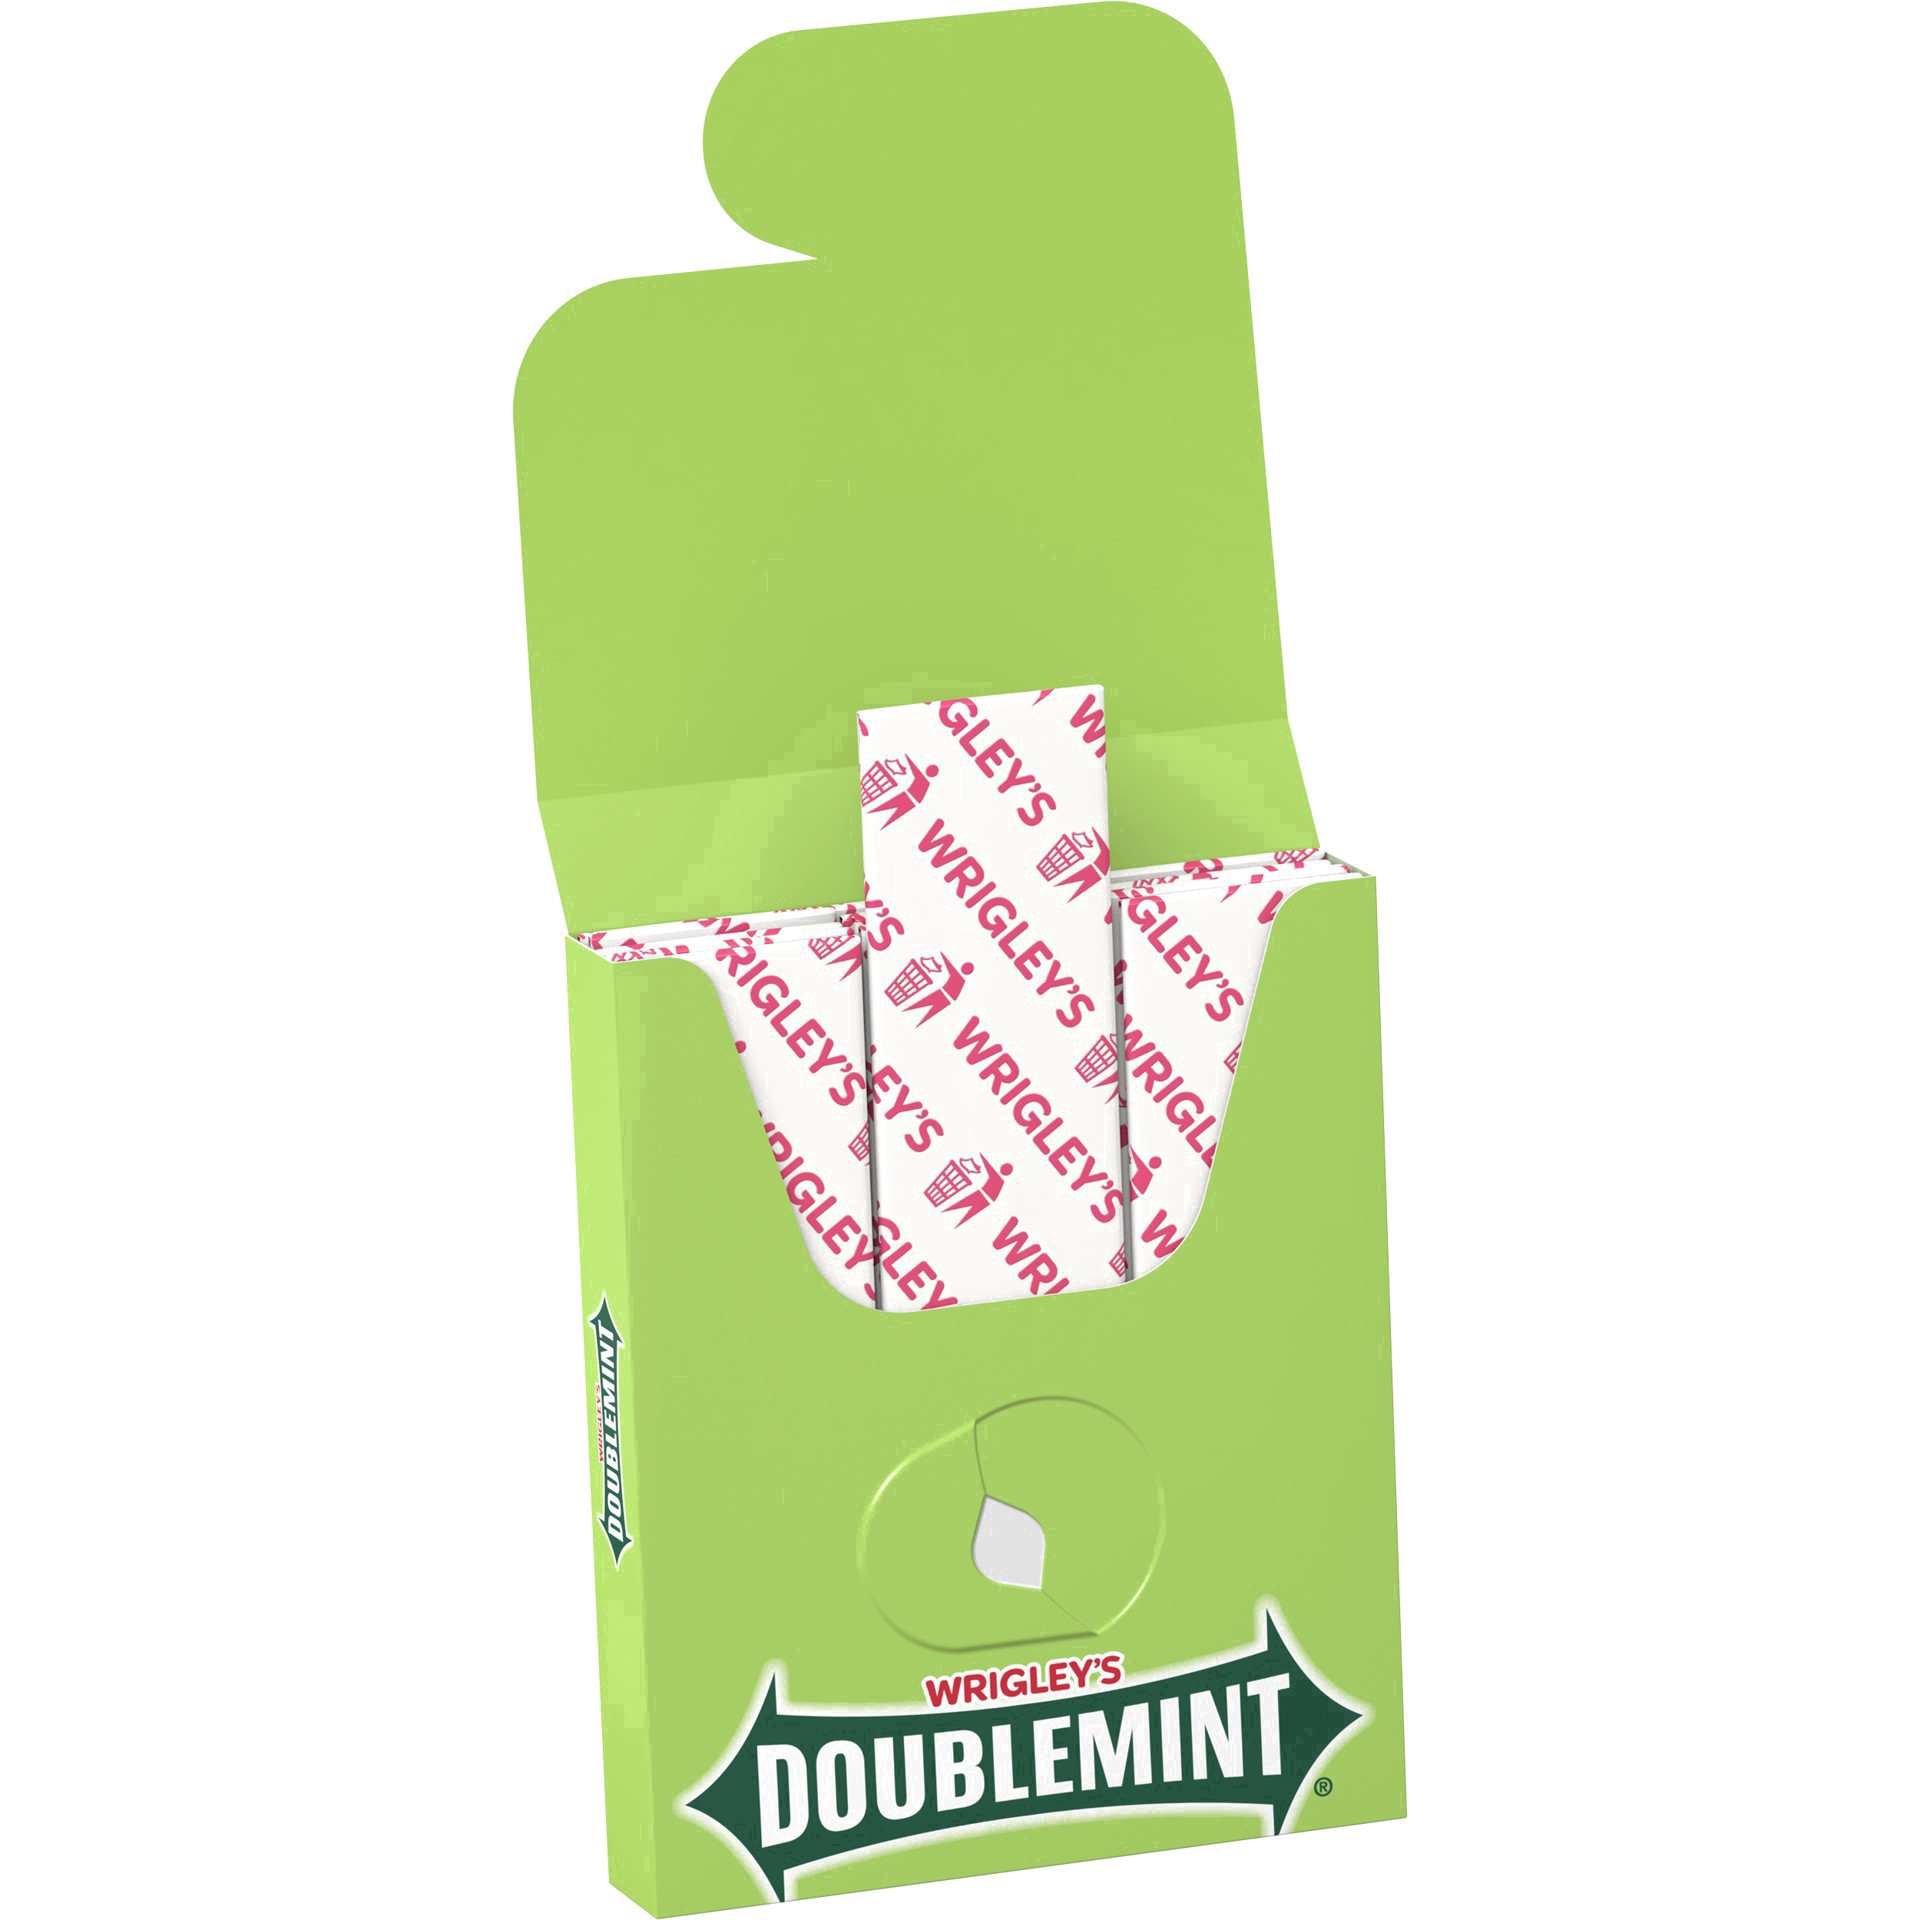 slide 81 of 134, Doublemint WRIGLEY'S DOUBLEMINT Bulk Chewing Gum, Value Pack, 15 ct (3 Pack), 45 ct